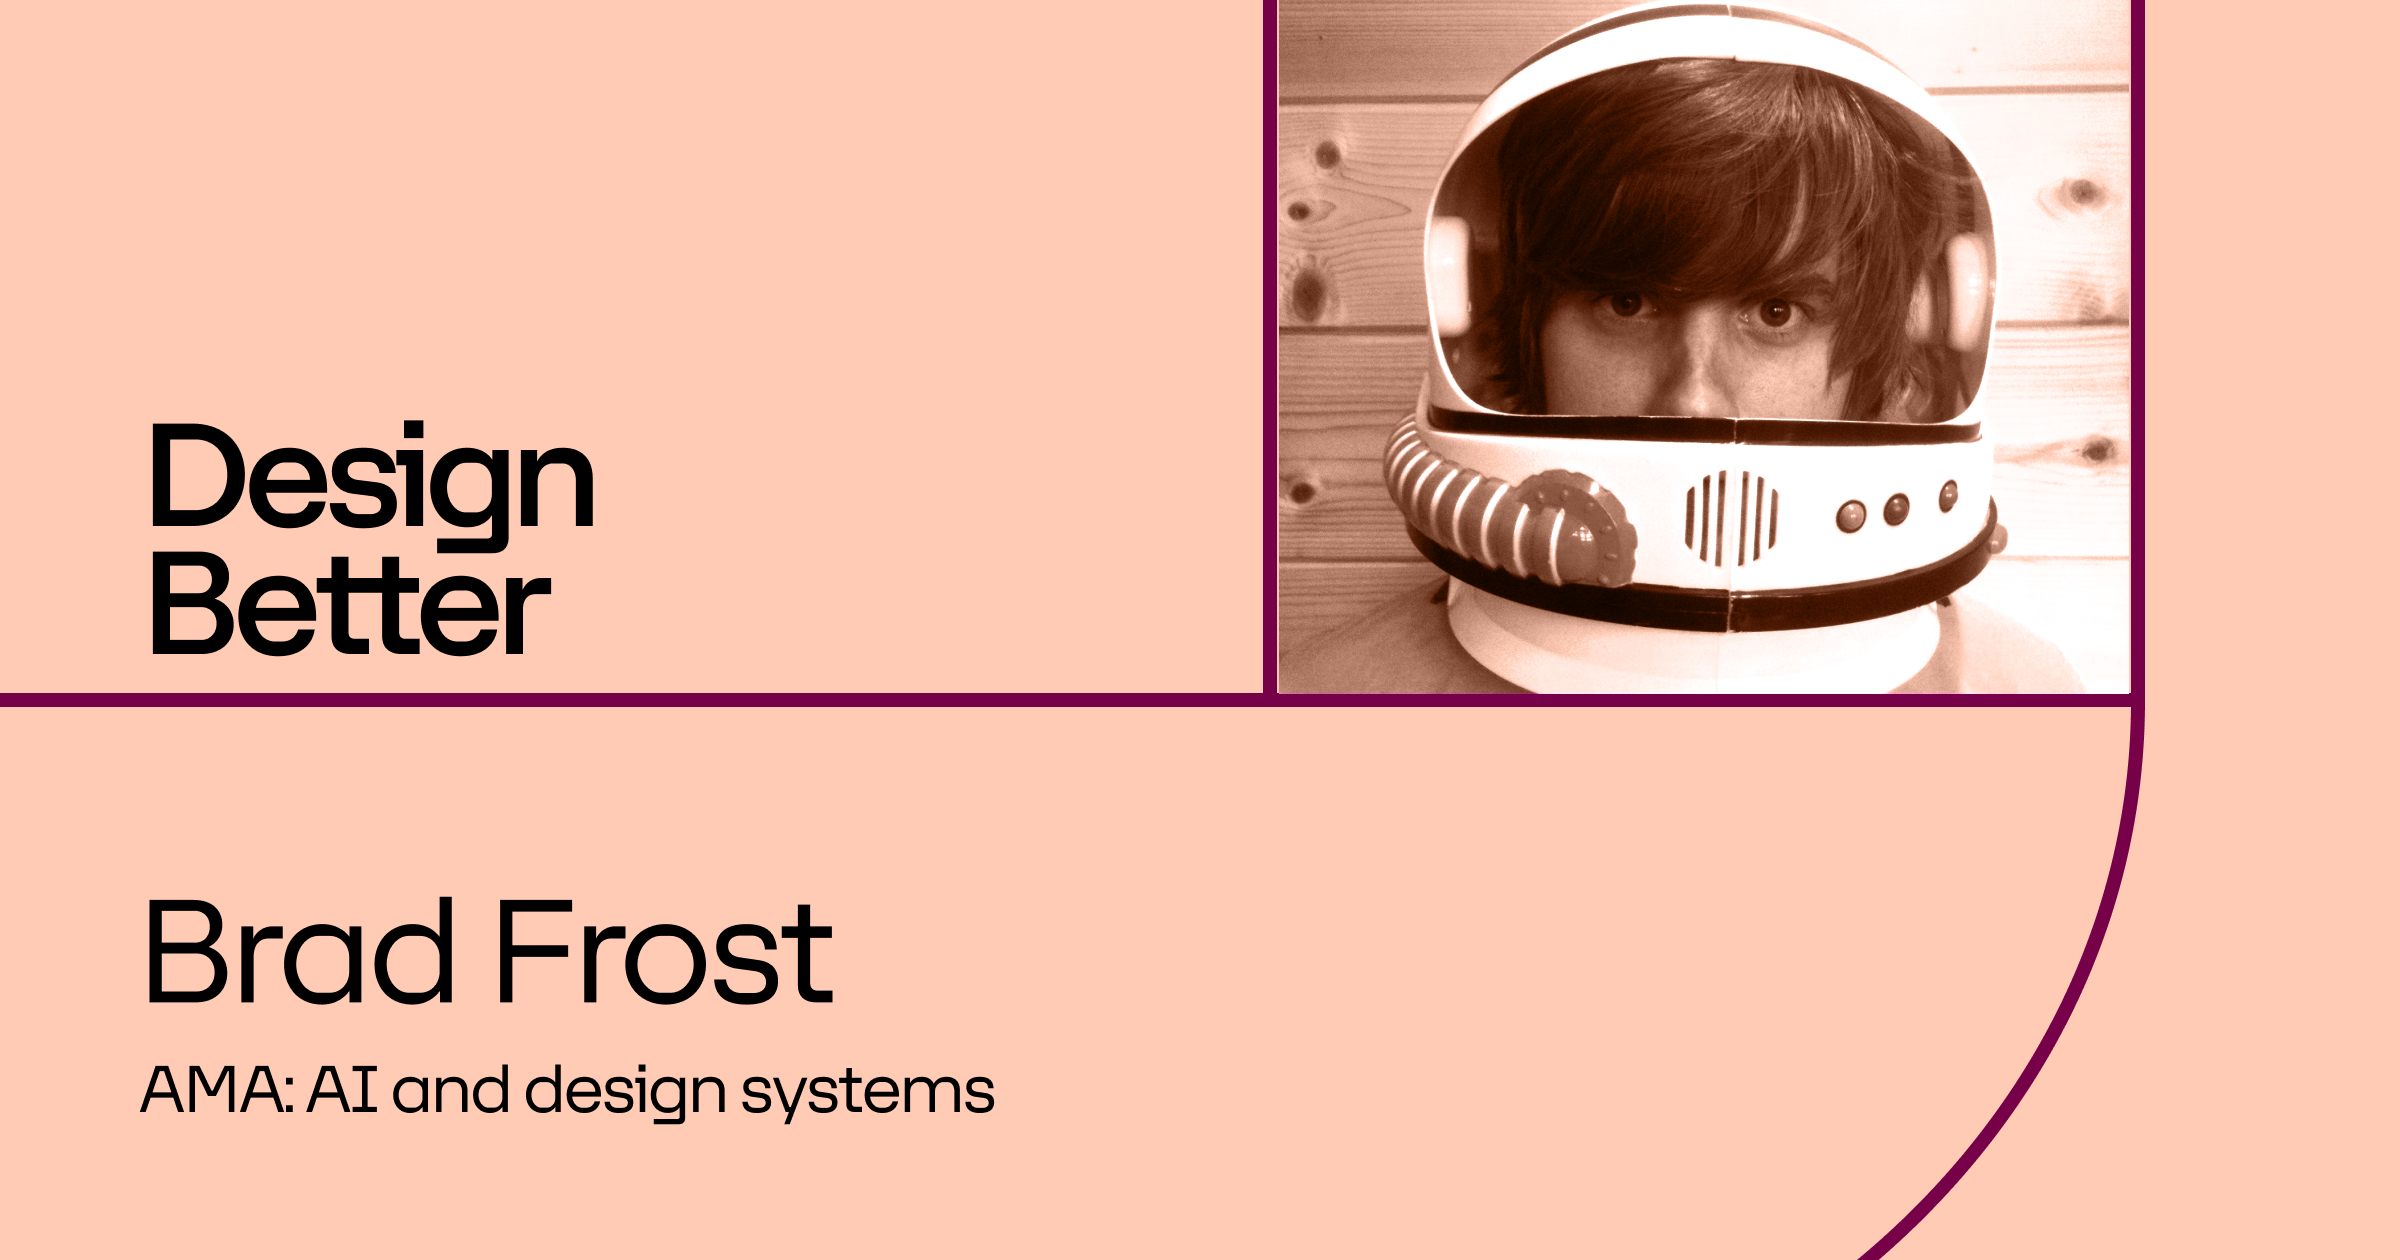 AMA: Brad Frost, AI and design systems event cover photo